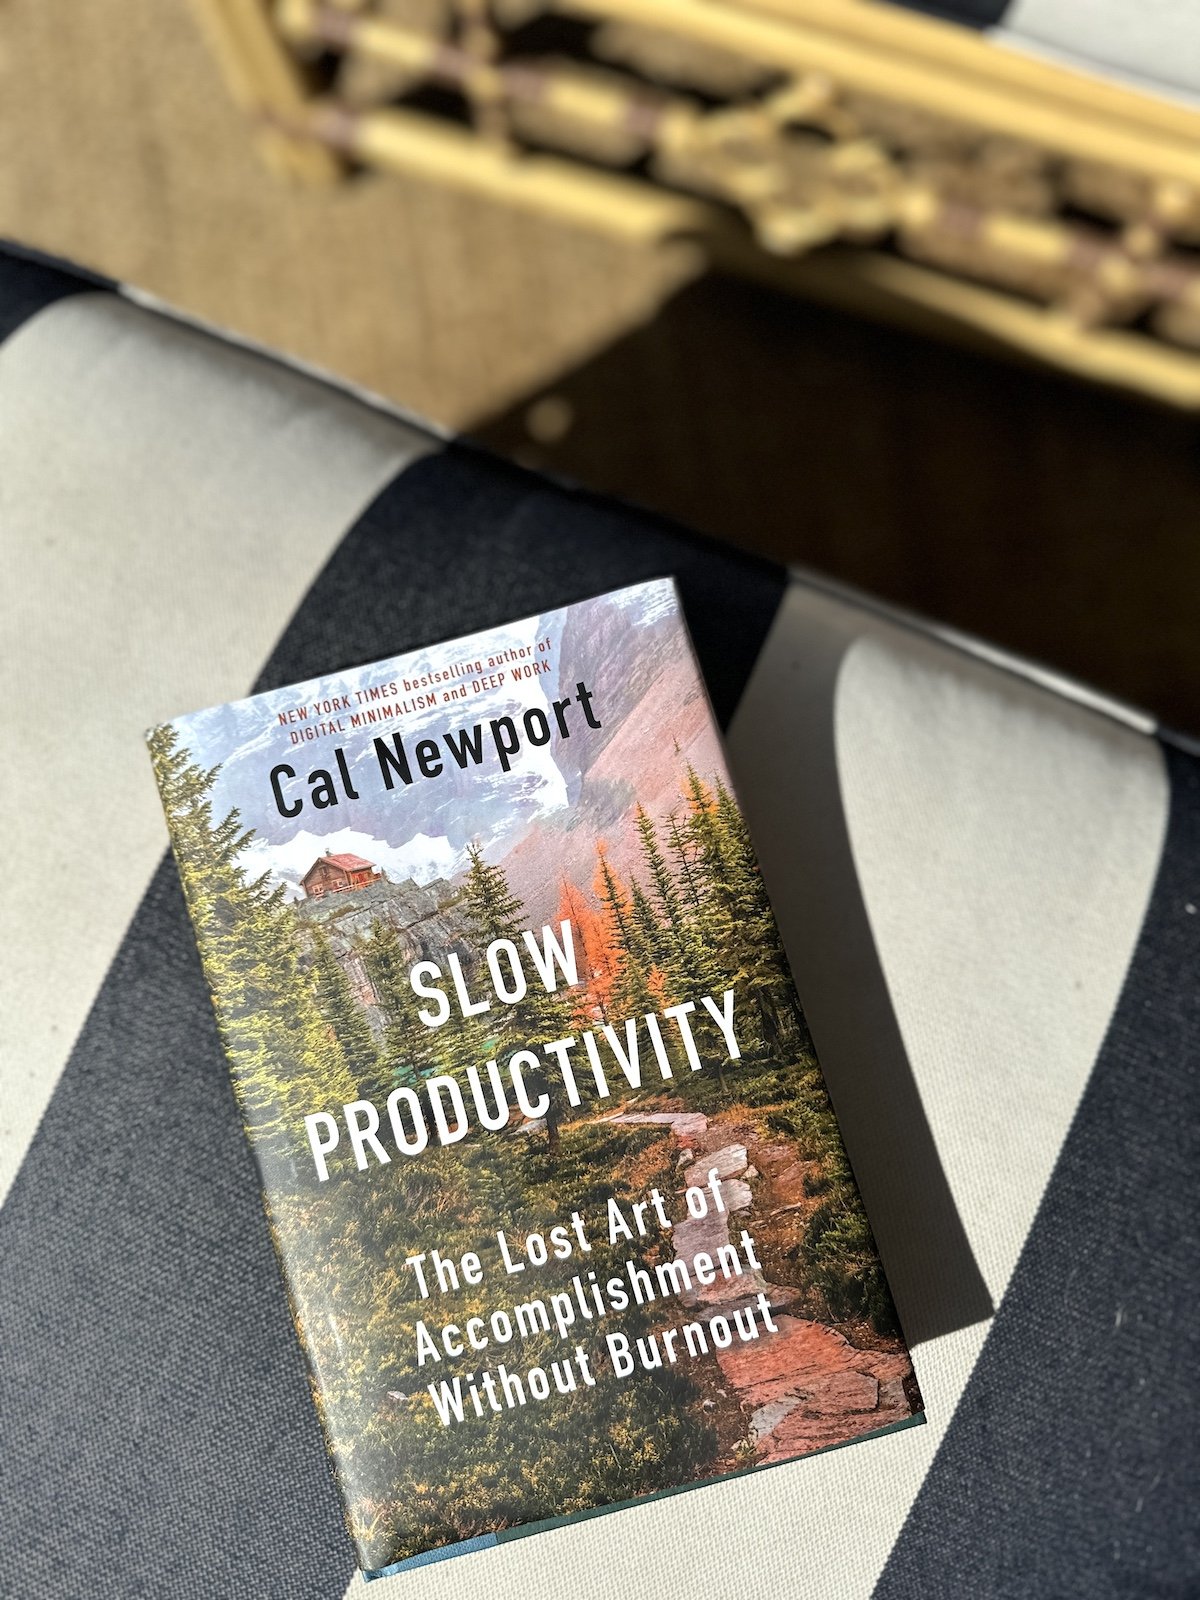 377: The Slow Productivity Approach that will Elevate the Quality of Your Entire Life, as taught by Cal Newport